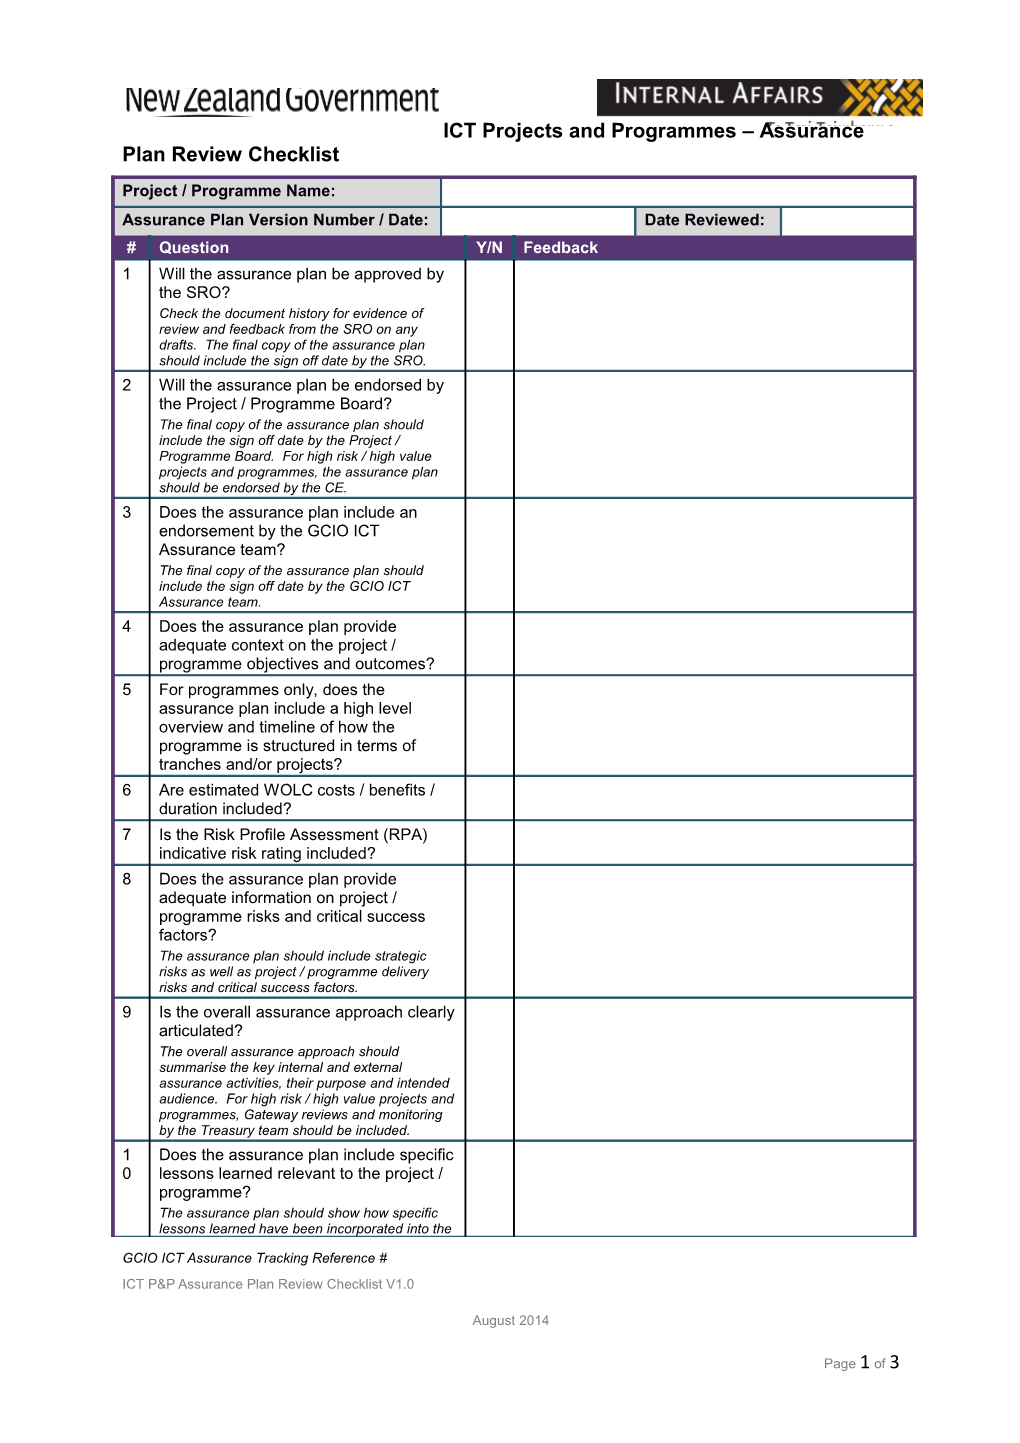 ICT Projects and Programmes Assurance Plan Review Checklist